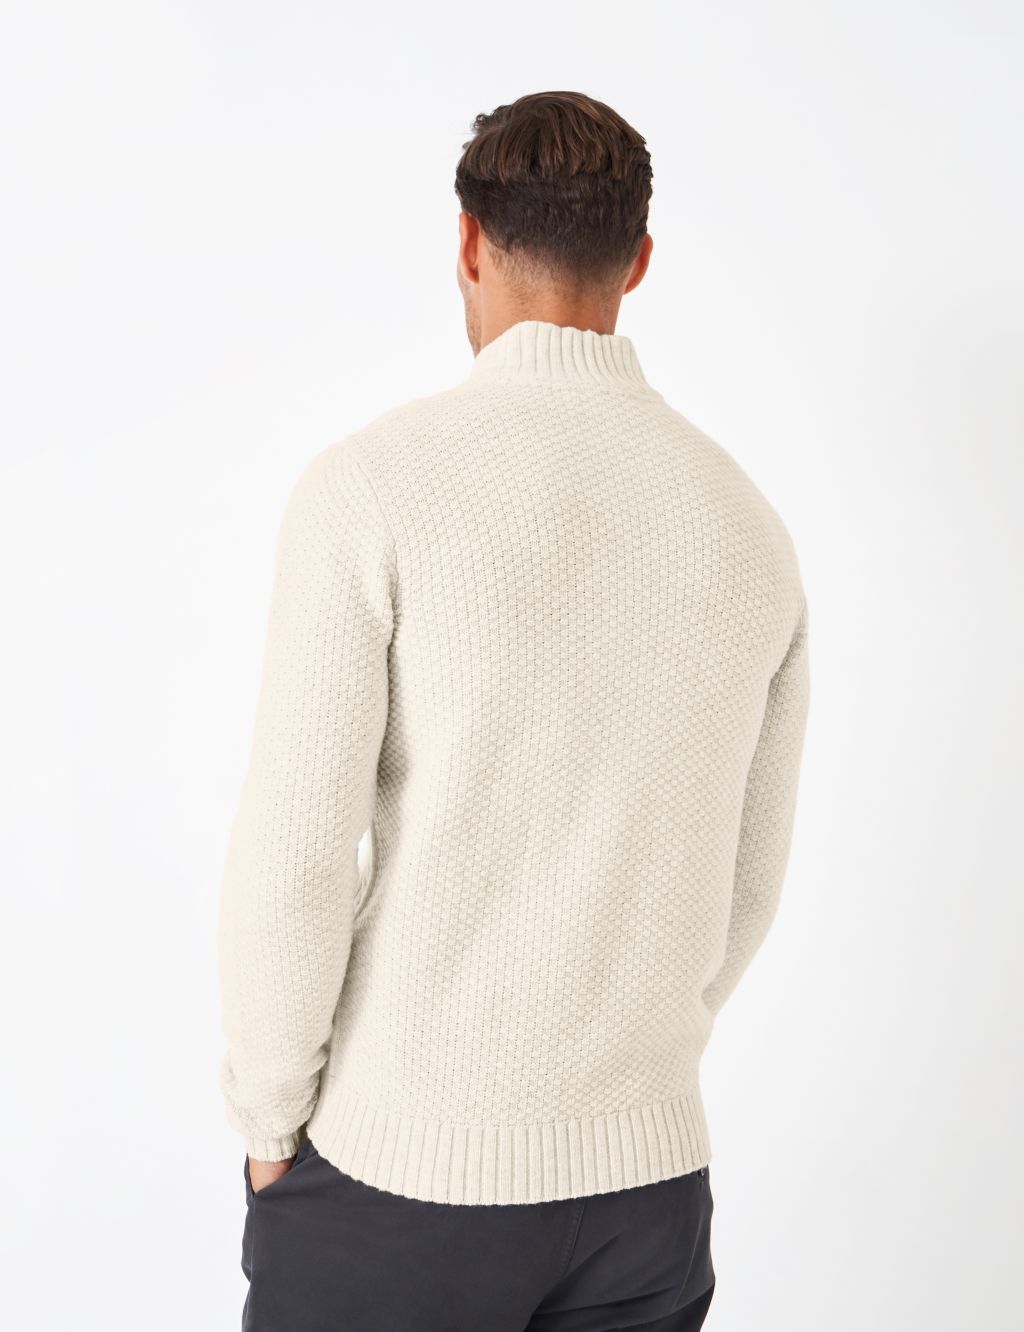 Wool Rich Cable High Neck Jumper image 4